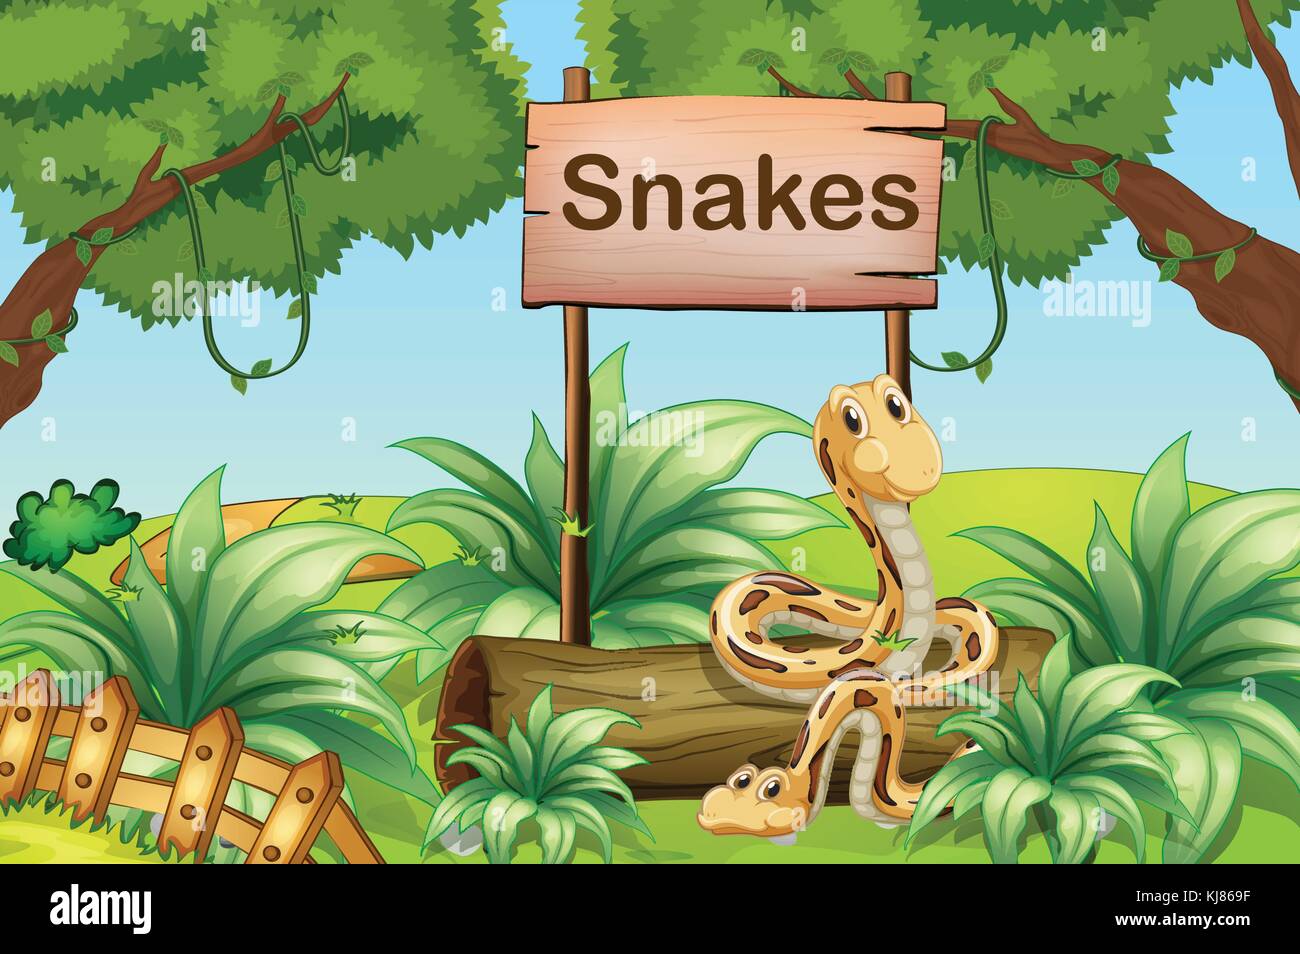 Illustration of the snakes in the hills beside a wooden signboard Stock Vector